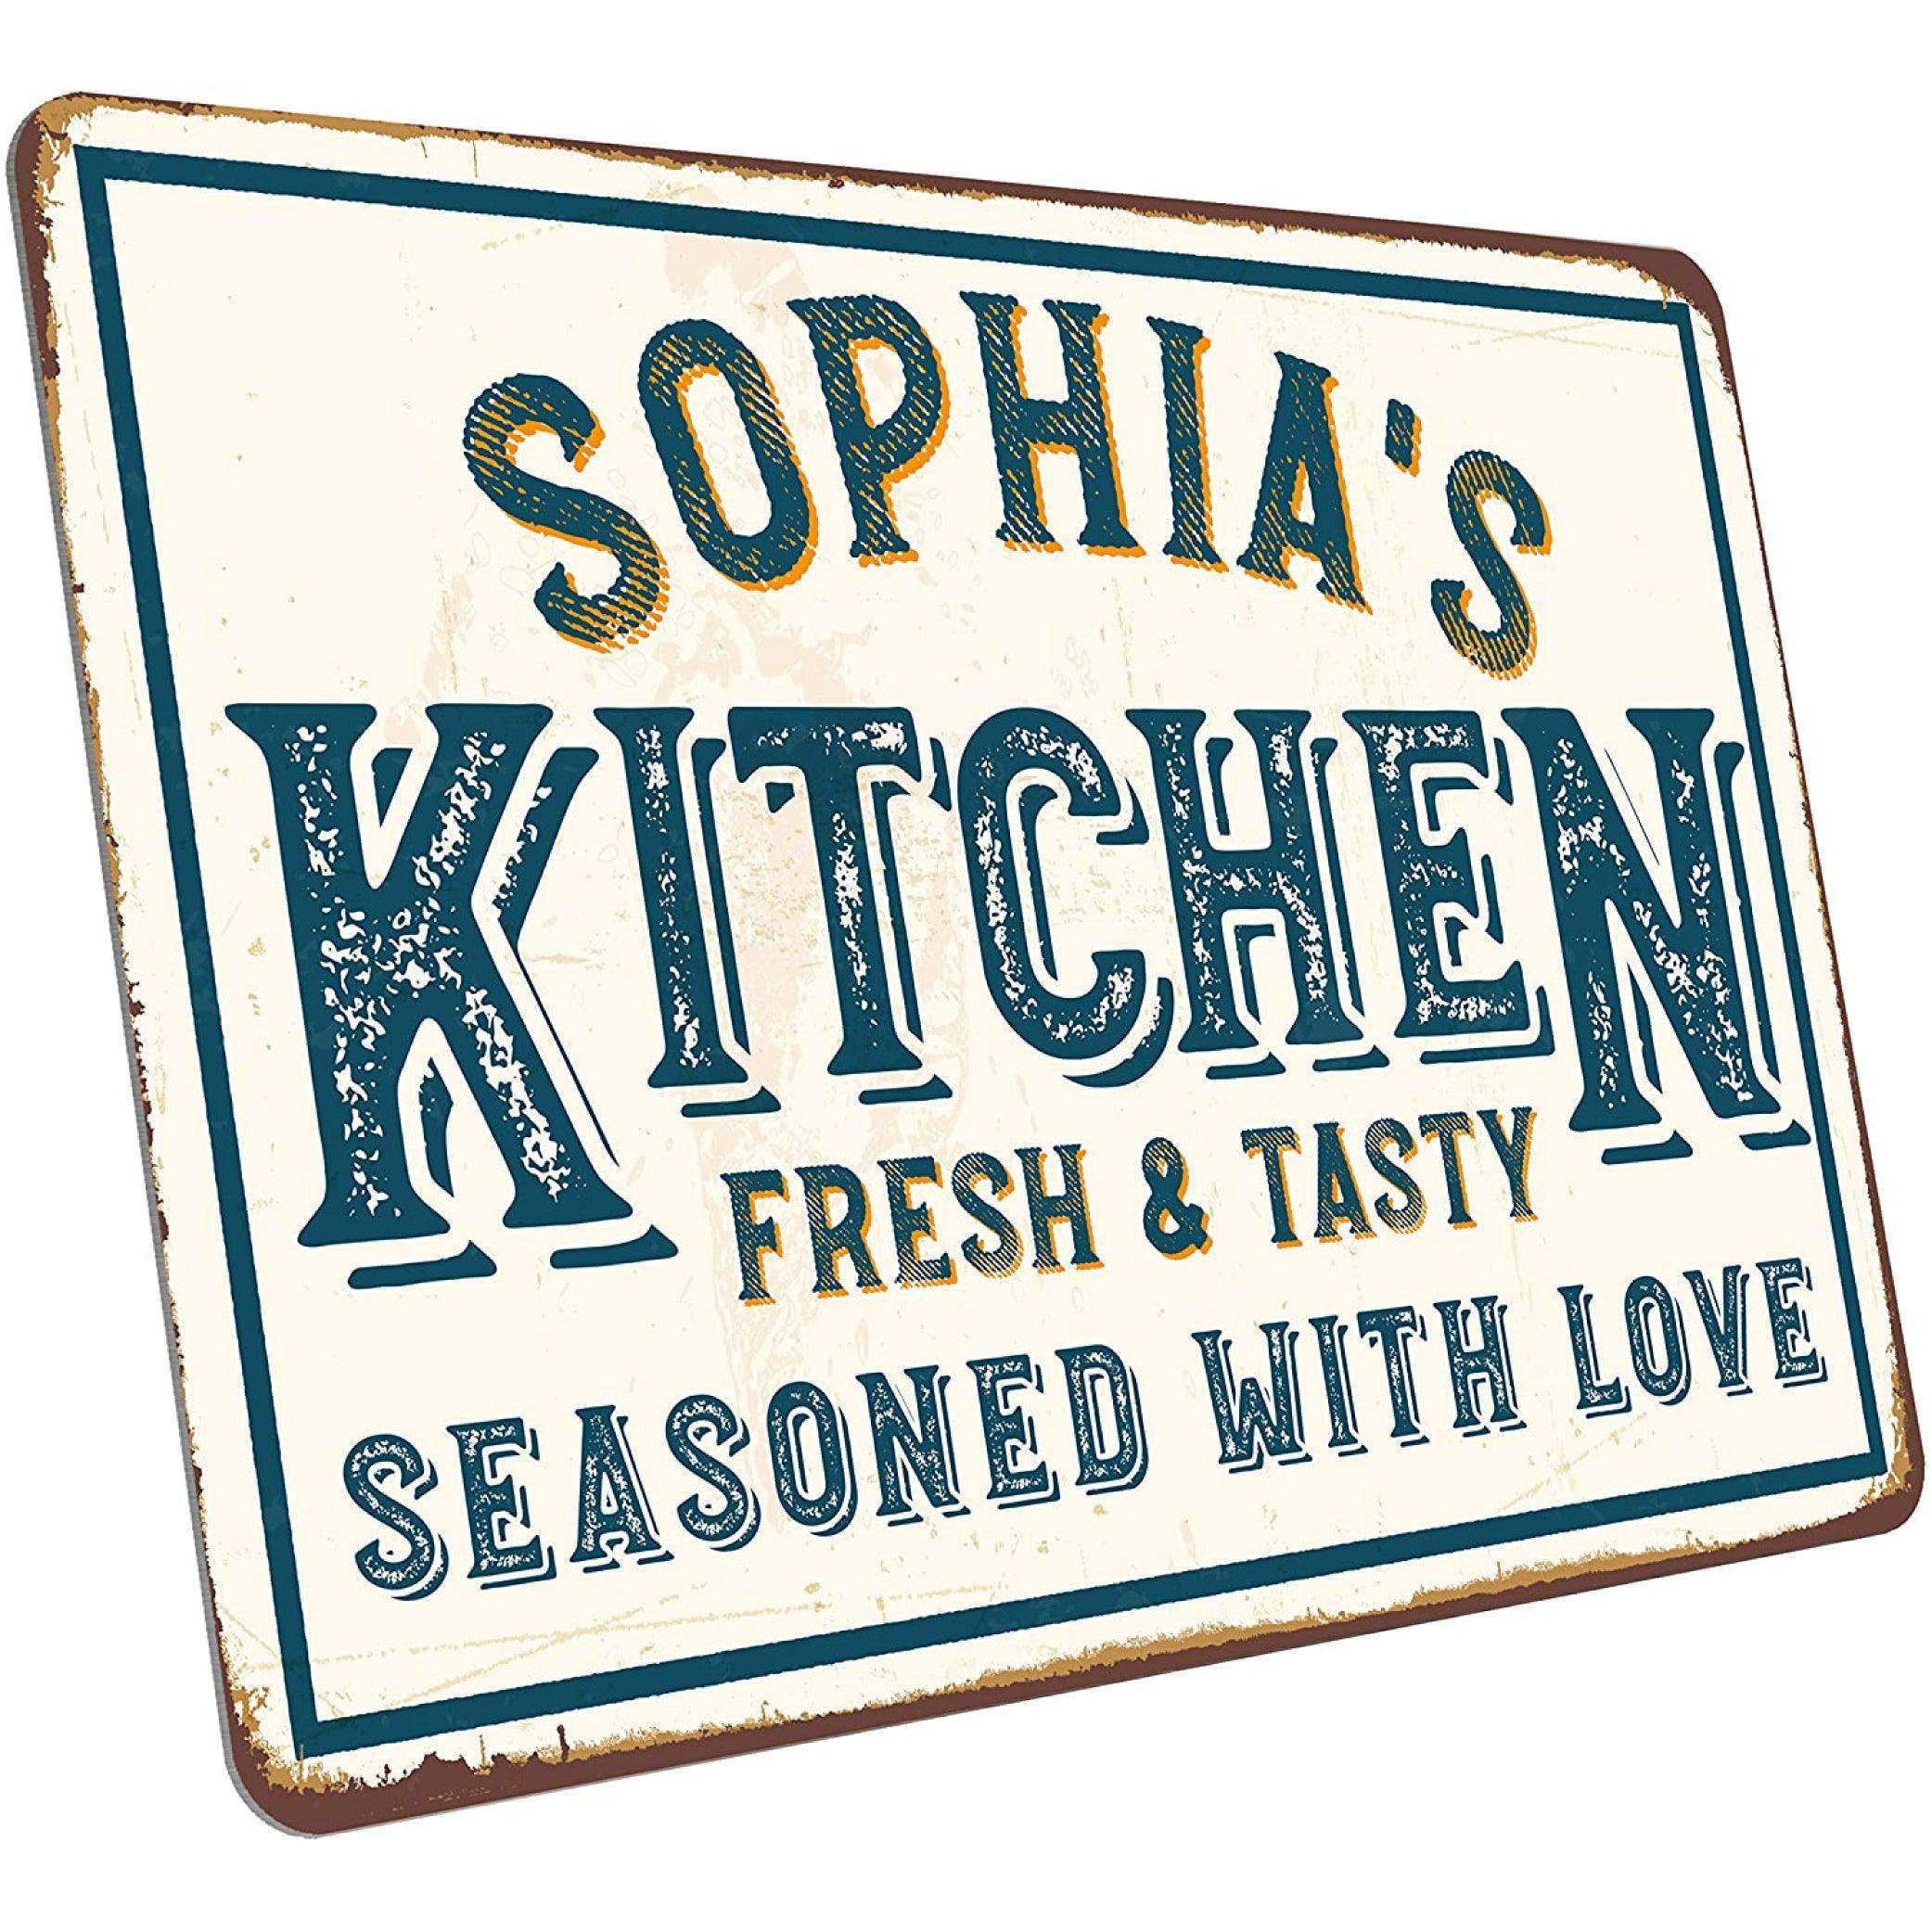  Wall Decor Personalized Kitchen Sign Vintage Kitchen